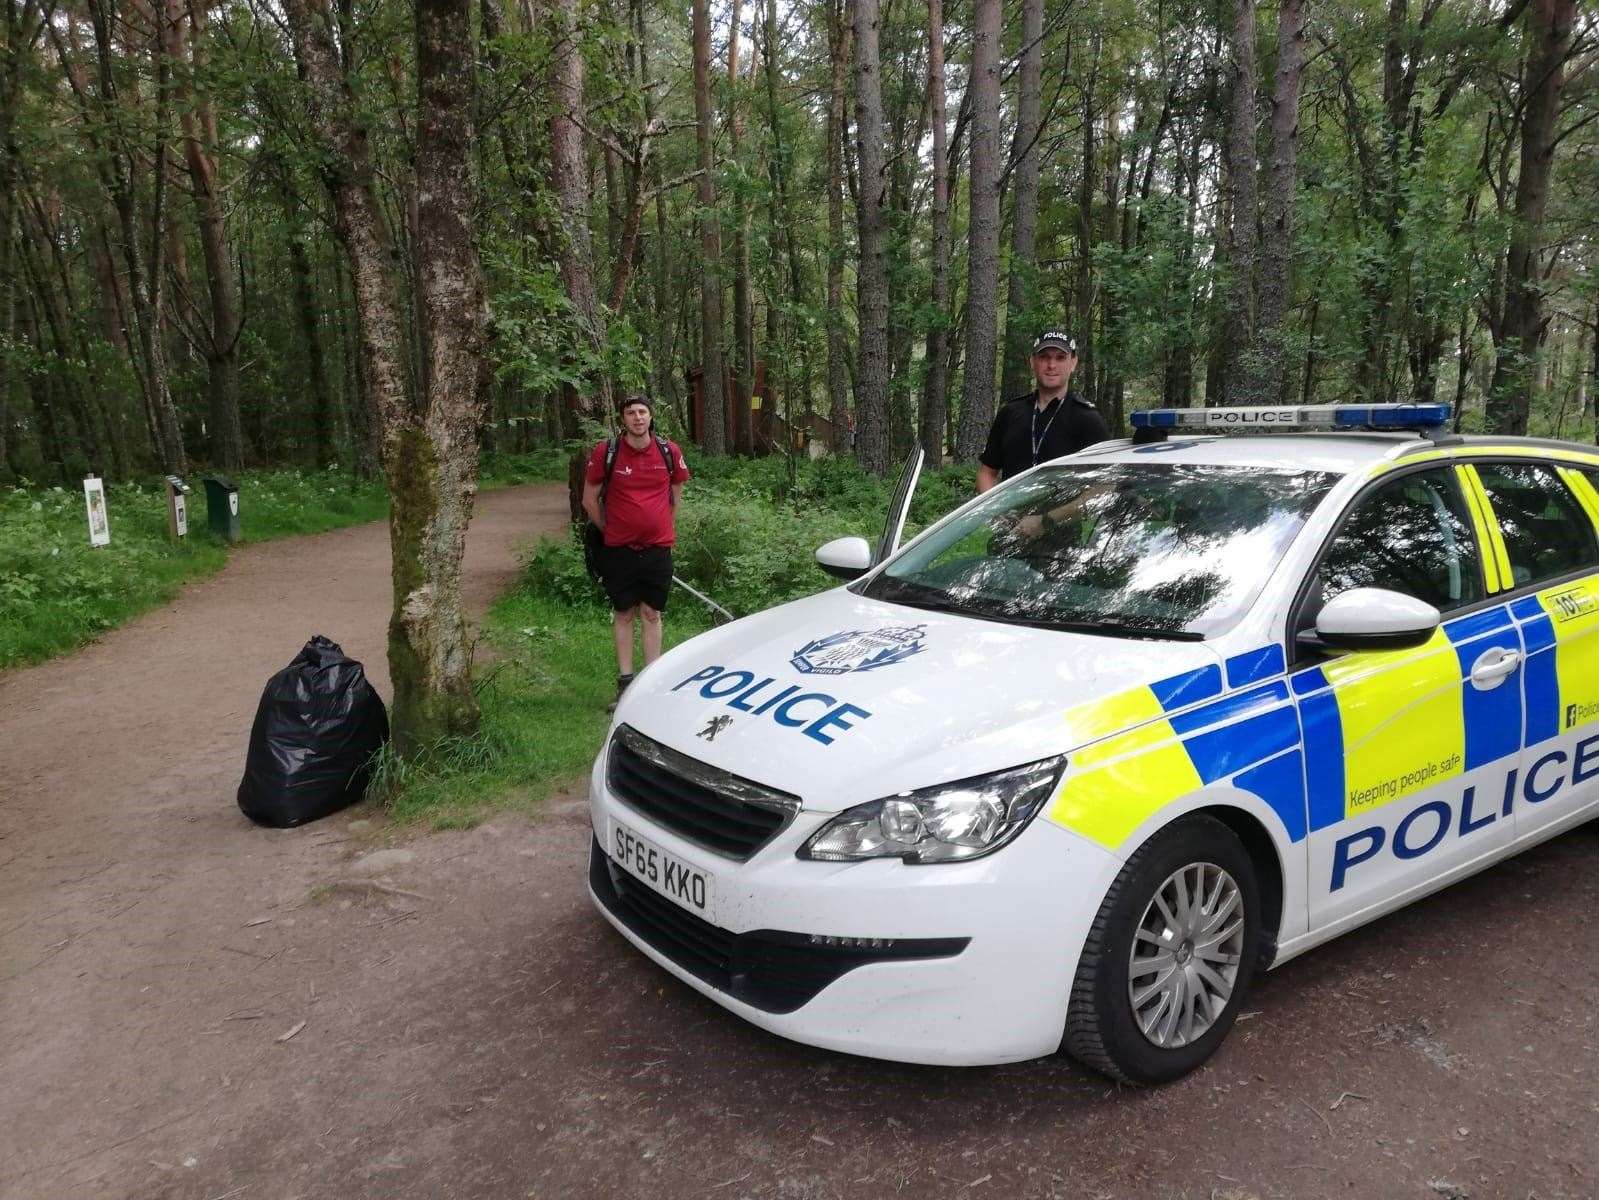 A CNPA ranger and an officer from Police Scotland on patrol at Glenmore.